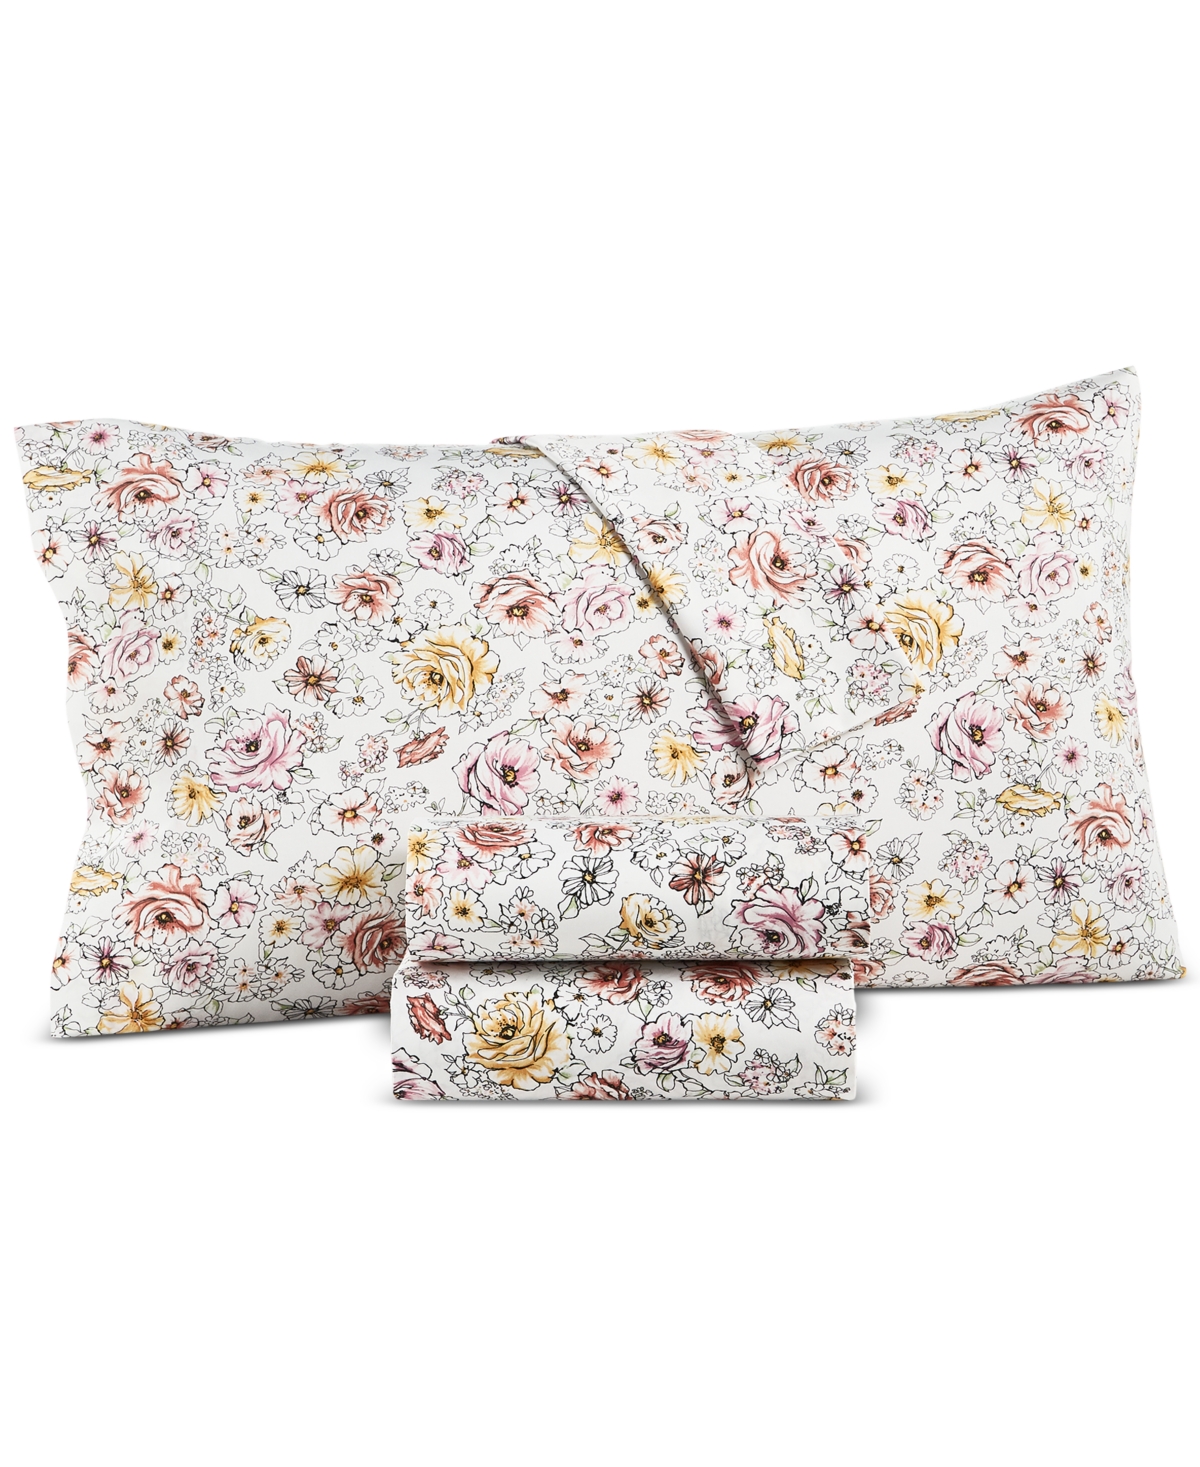 Charter Club Damask Designs 550 Thread Count Printed Cotton 4-pc. Sheet Set, Queen, Created For Macy's In Outlined Floral Poppy